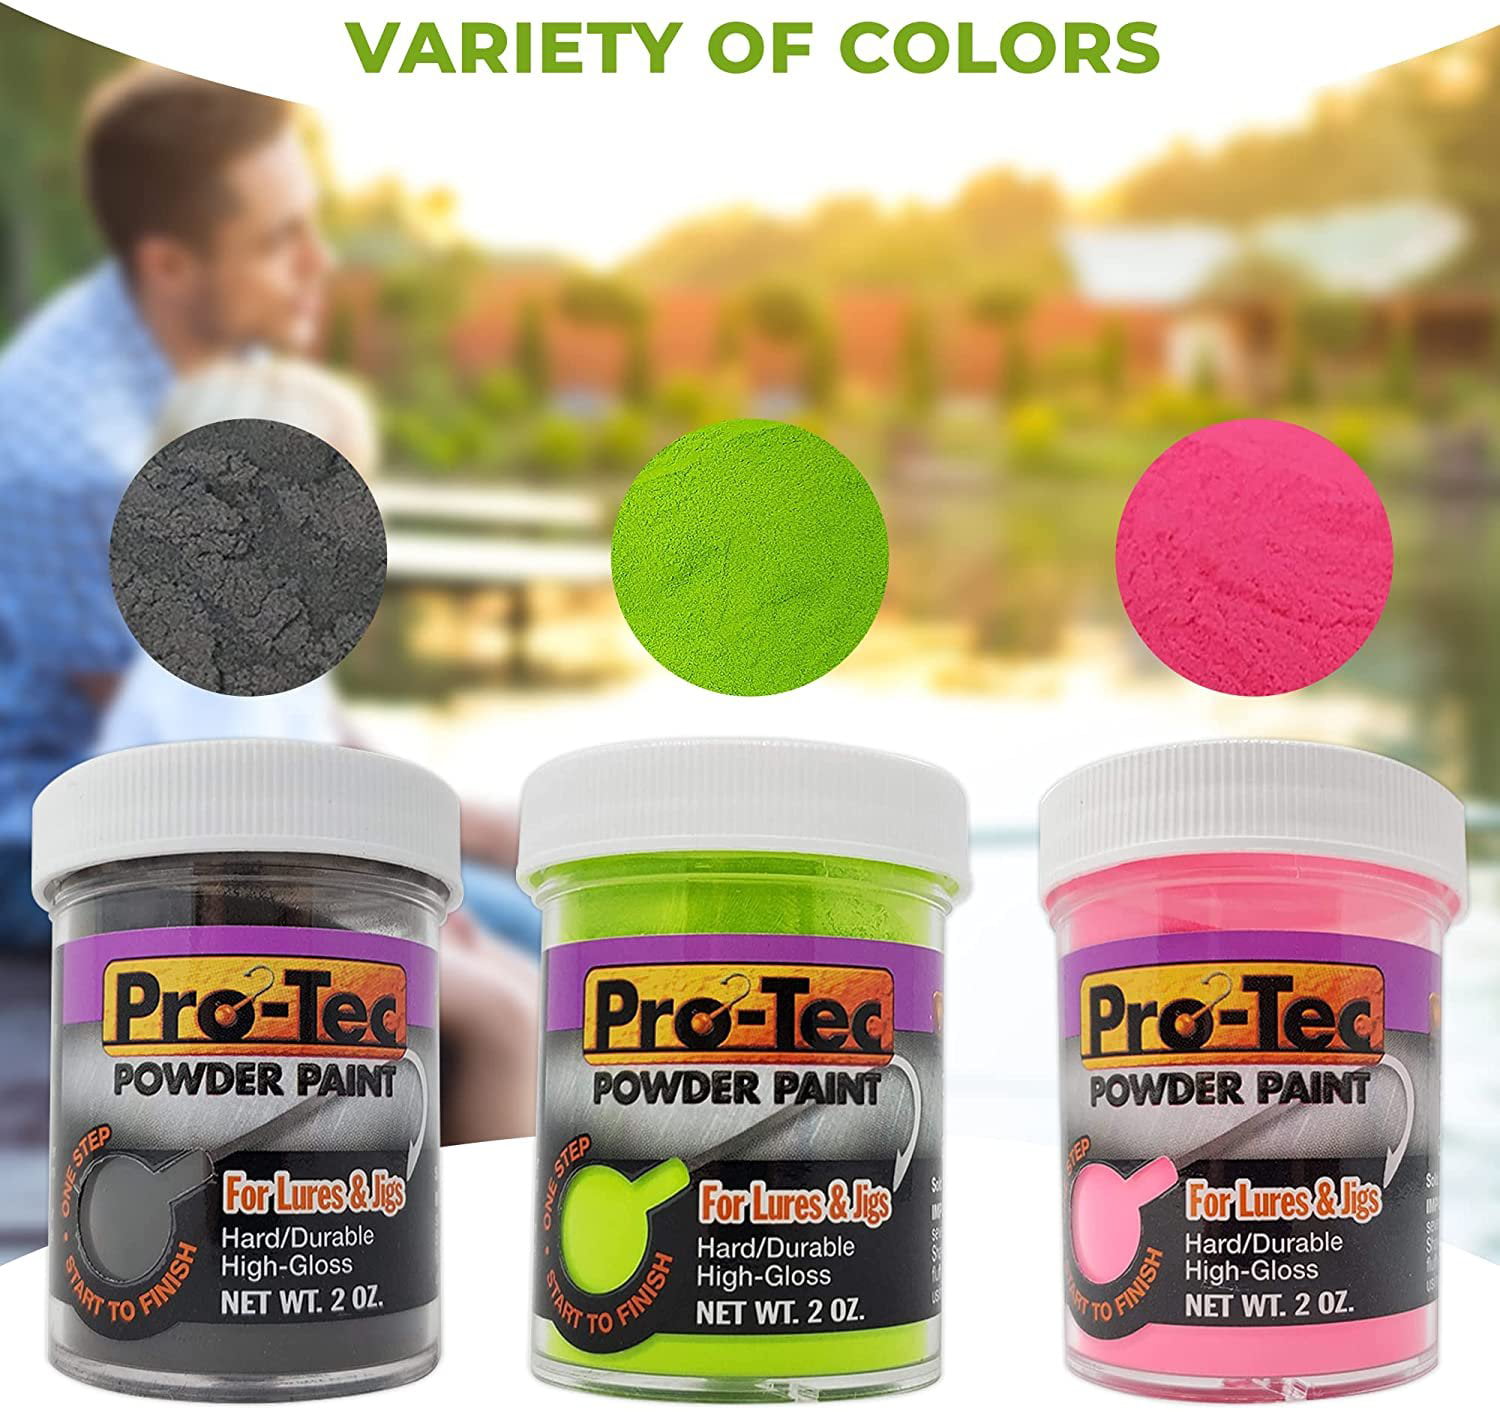 One Pound Can of Pro-Tec Lure Powder Paint, Cheaper by the Pound!!! Fishing  Lure Paint, Jig Head Fishing Paint (Green Chartreuse 1LB)